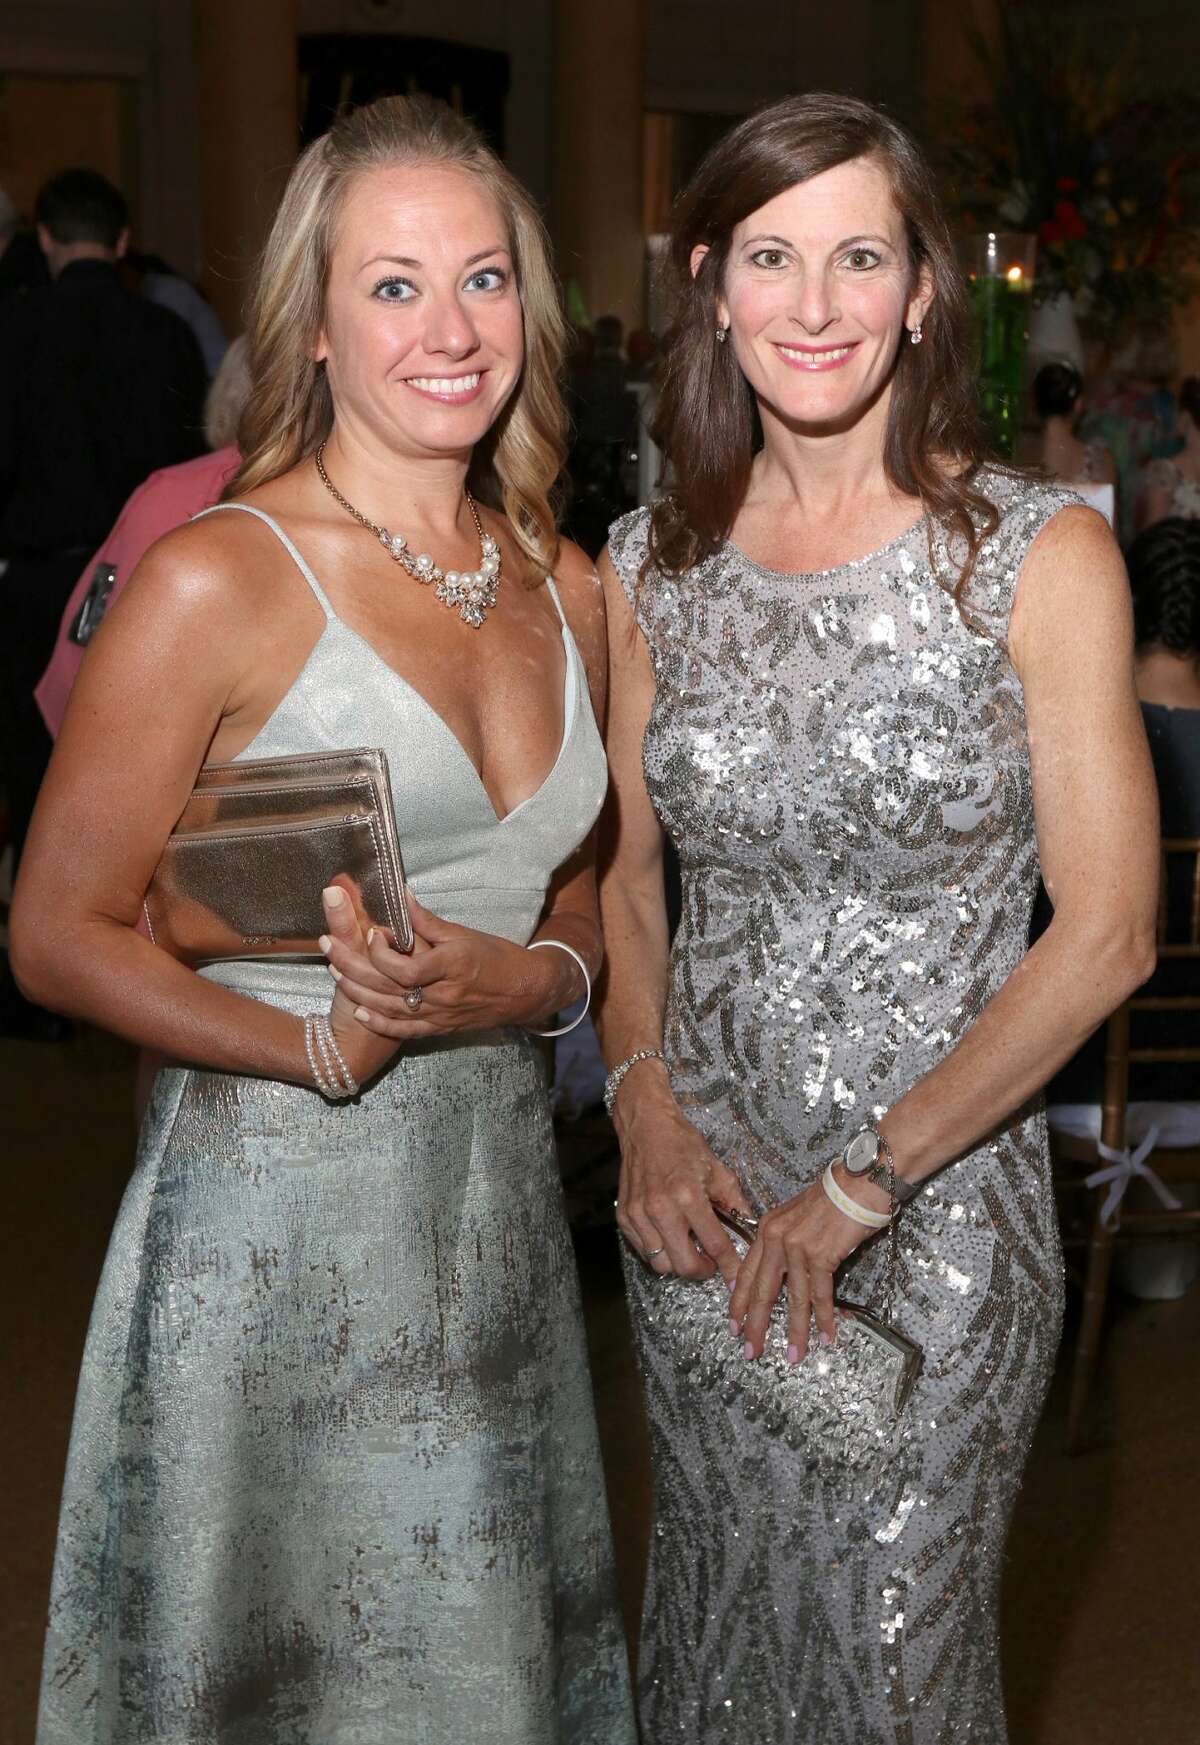 Were you Seen at the annual Ballet Gala, the primary fundraiser for the New York City Ballet summer residency, held at the Hall of Springs and on the lawn at SPAC in Saratoga Springs on Saturday, July 21, 2018?